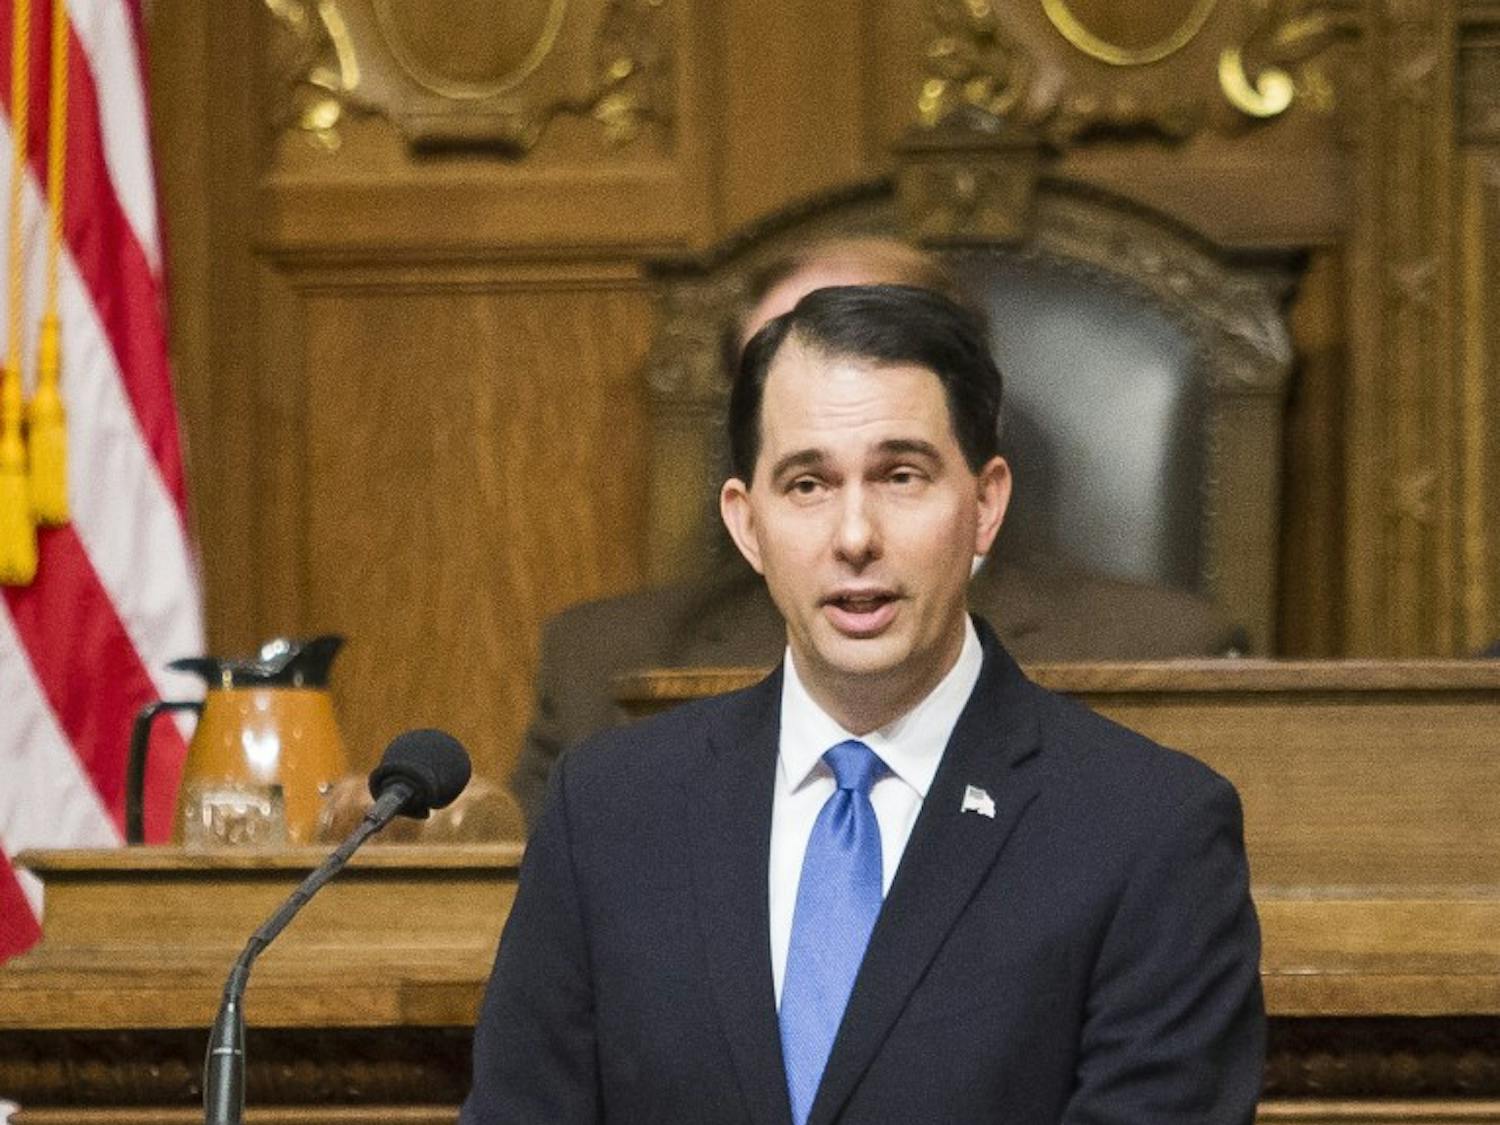 Gov. Scott Walker touted a series of bills that he says would make college more affordable at Tuesday's State of the State address.